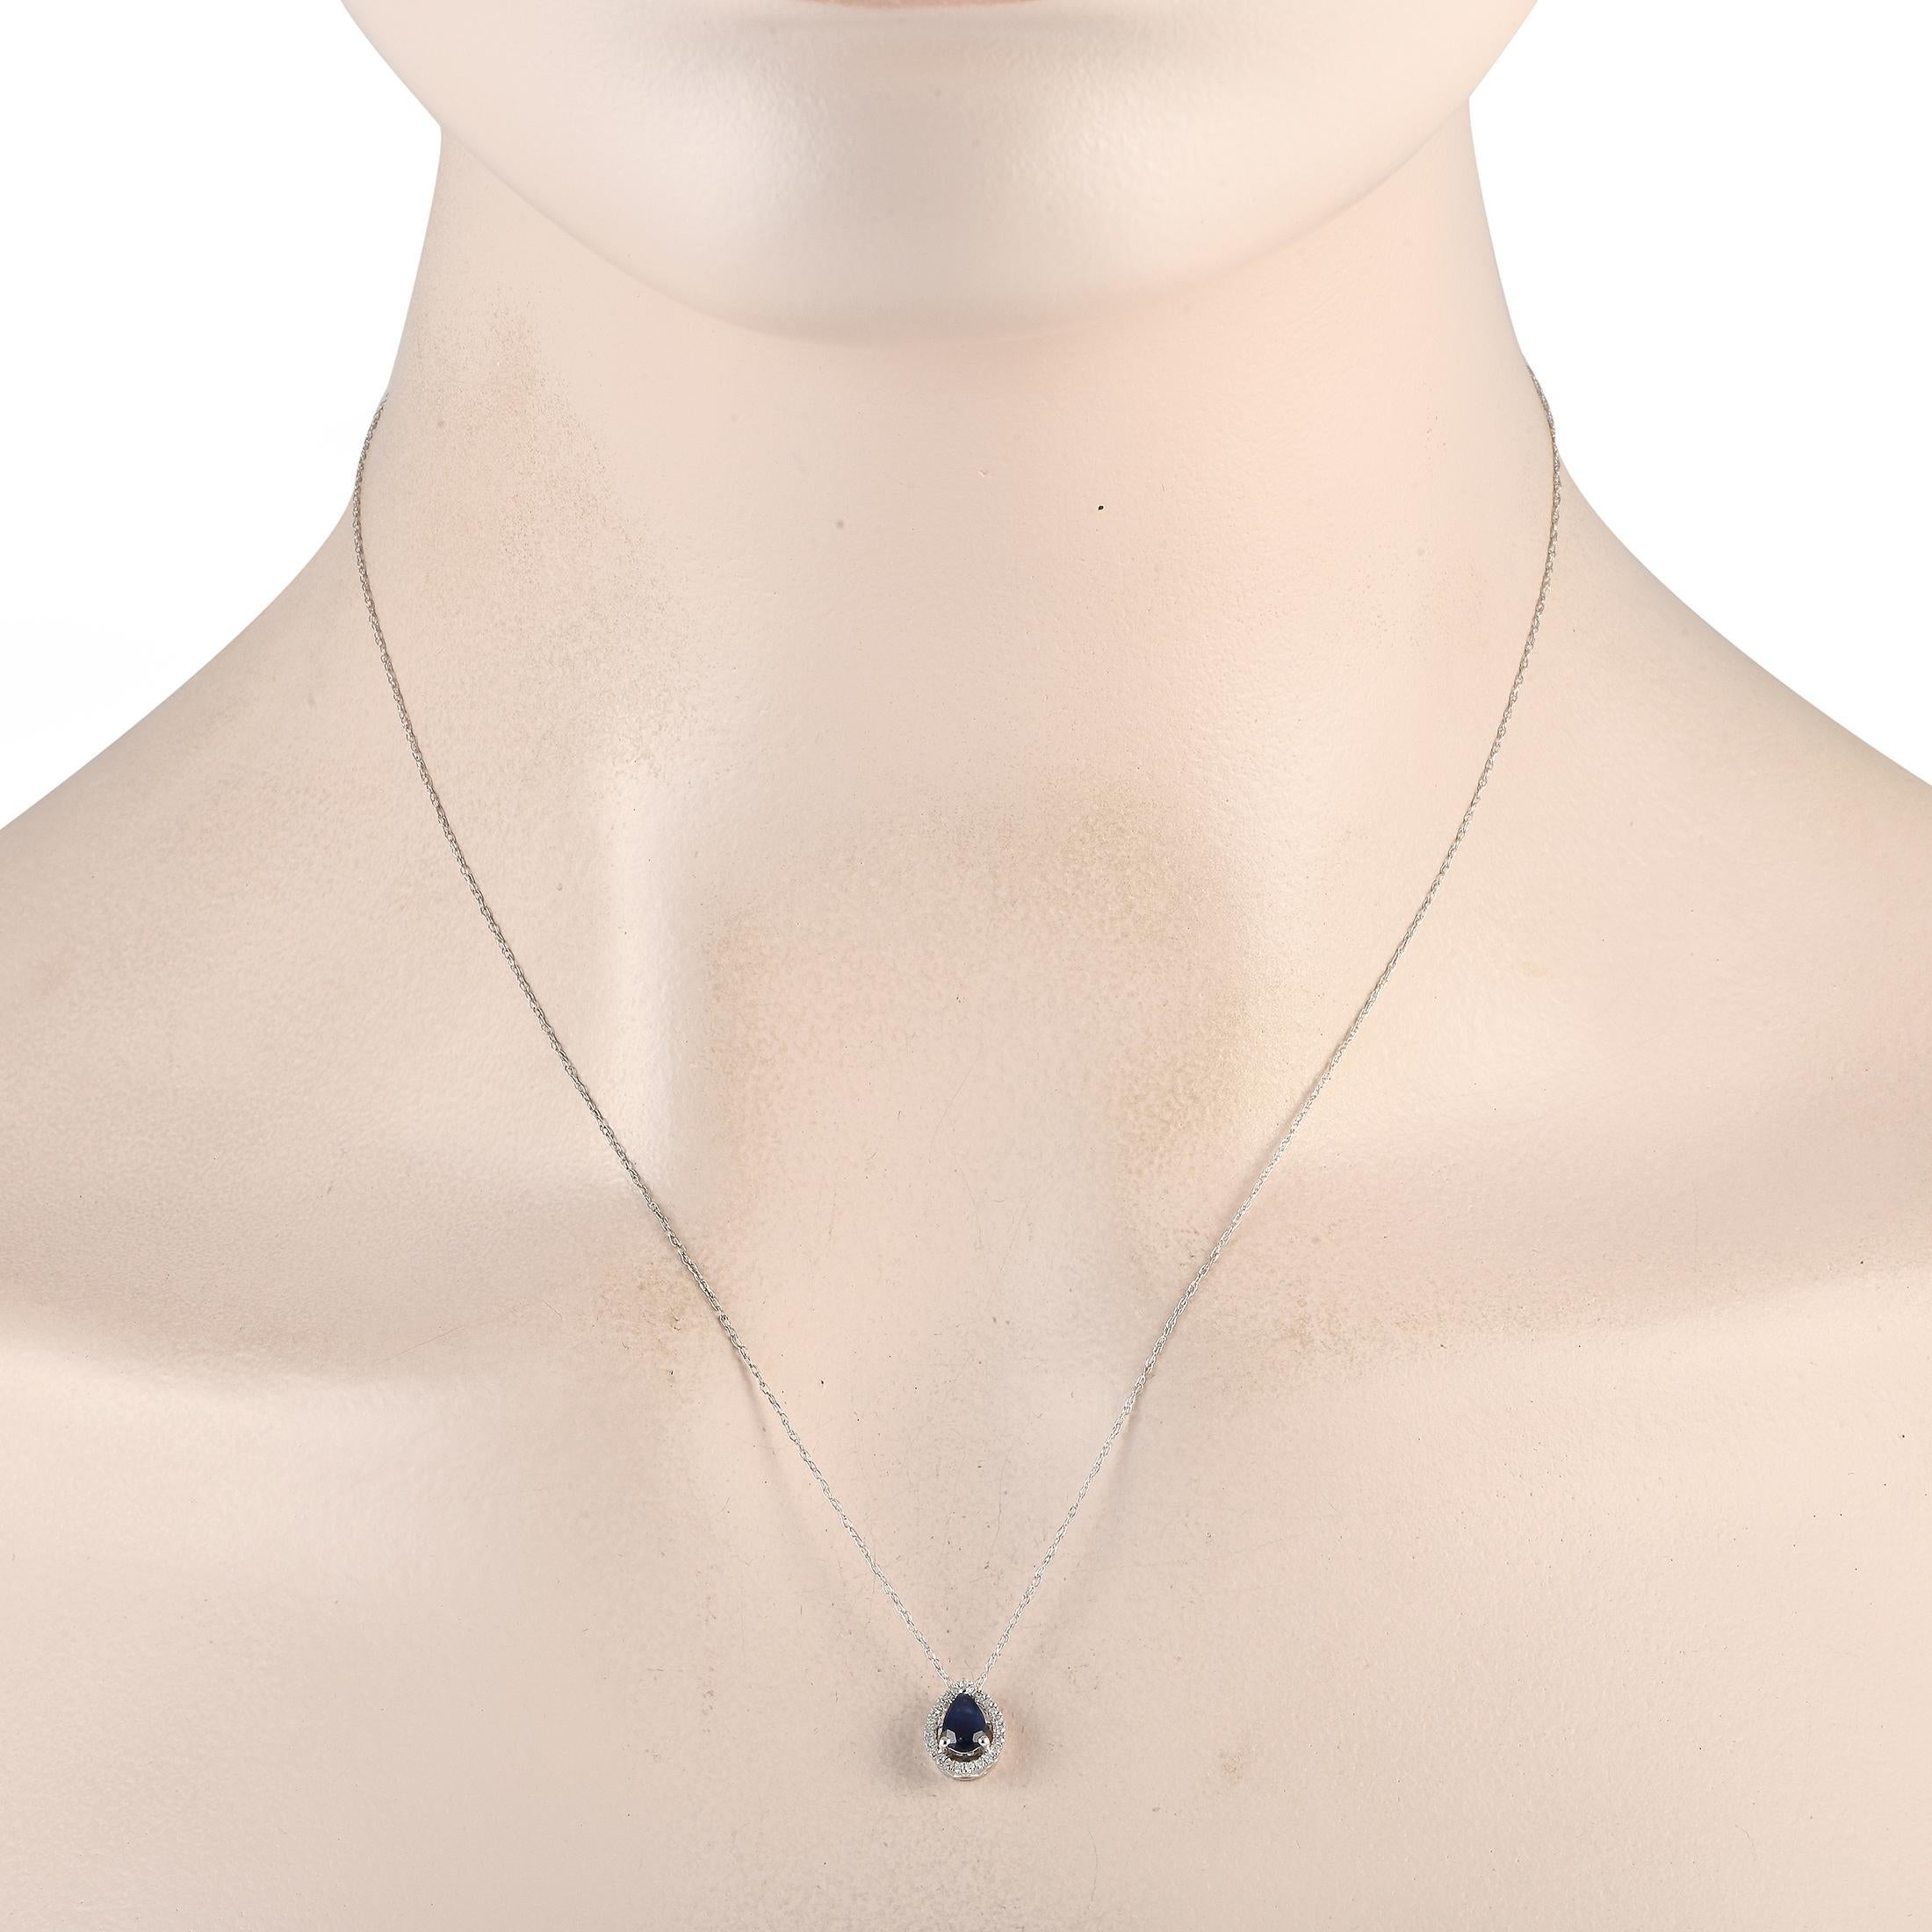 This necklace is a luxury piece with a timeless sense of style. Suspended from an 18 chain, youll find a 14K White Gold pendant that is elevated by a stunning Sapphire center stone and sparkling Diamonds totaling 0.07 carats. The pendant measures